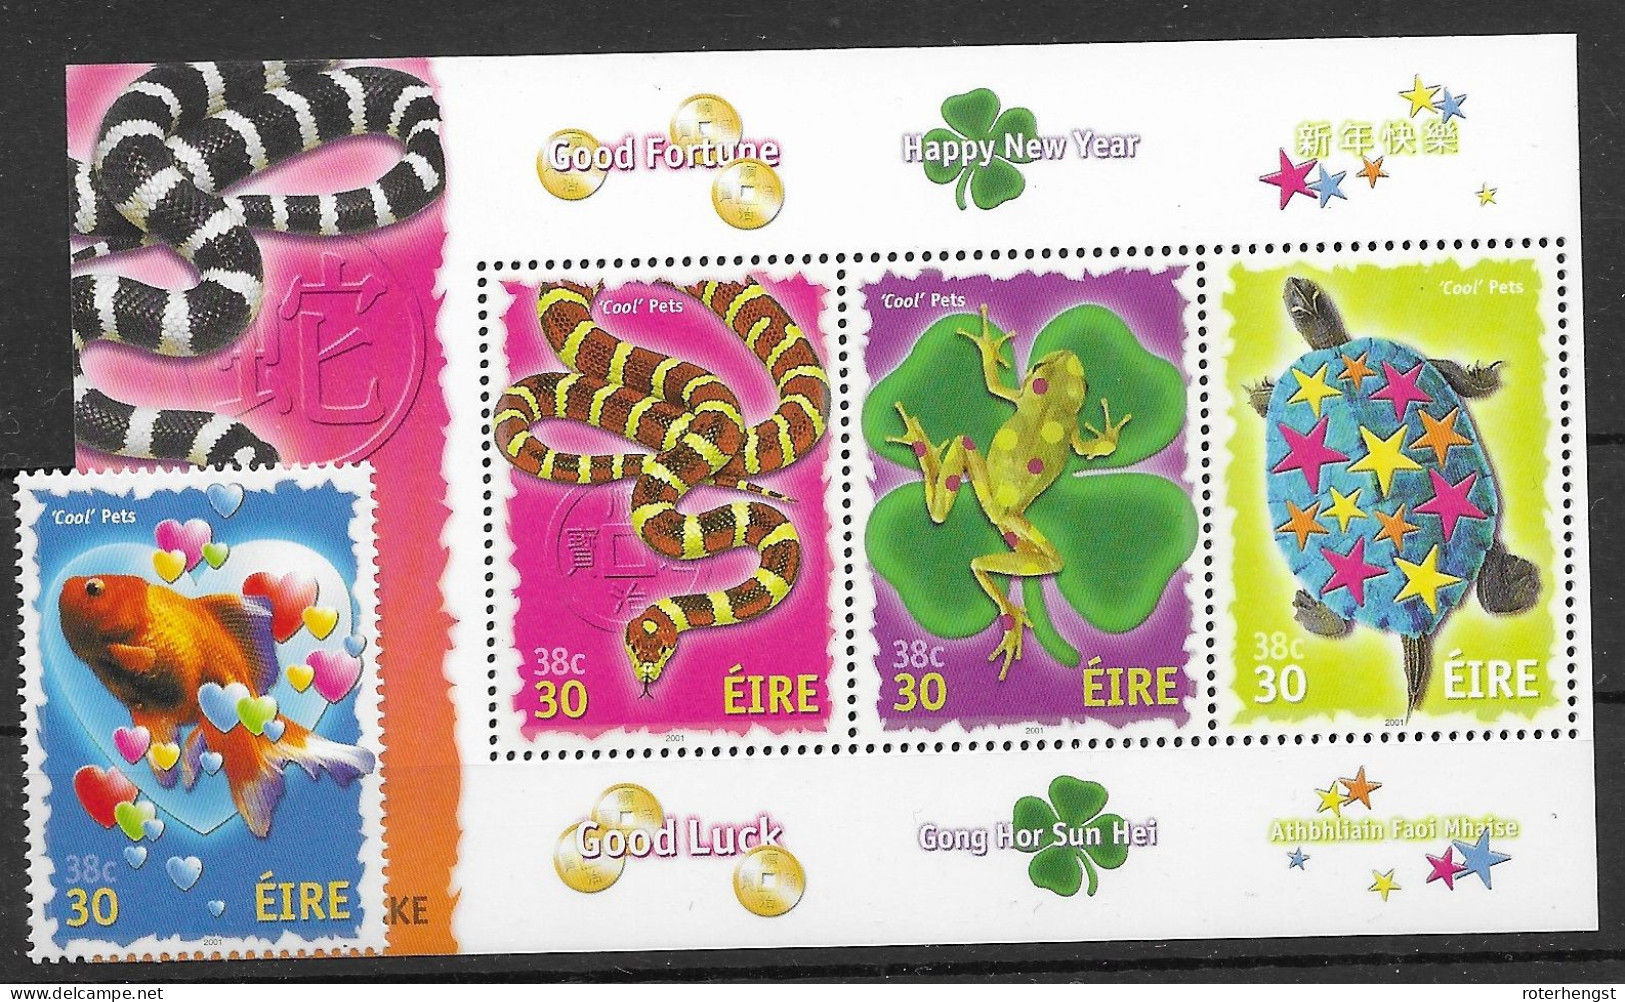 Ireland Sheet And Fish Stamp Mnh ** 2001 Snake Frog Turtle - Unused Stamps